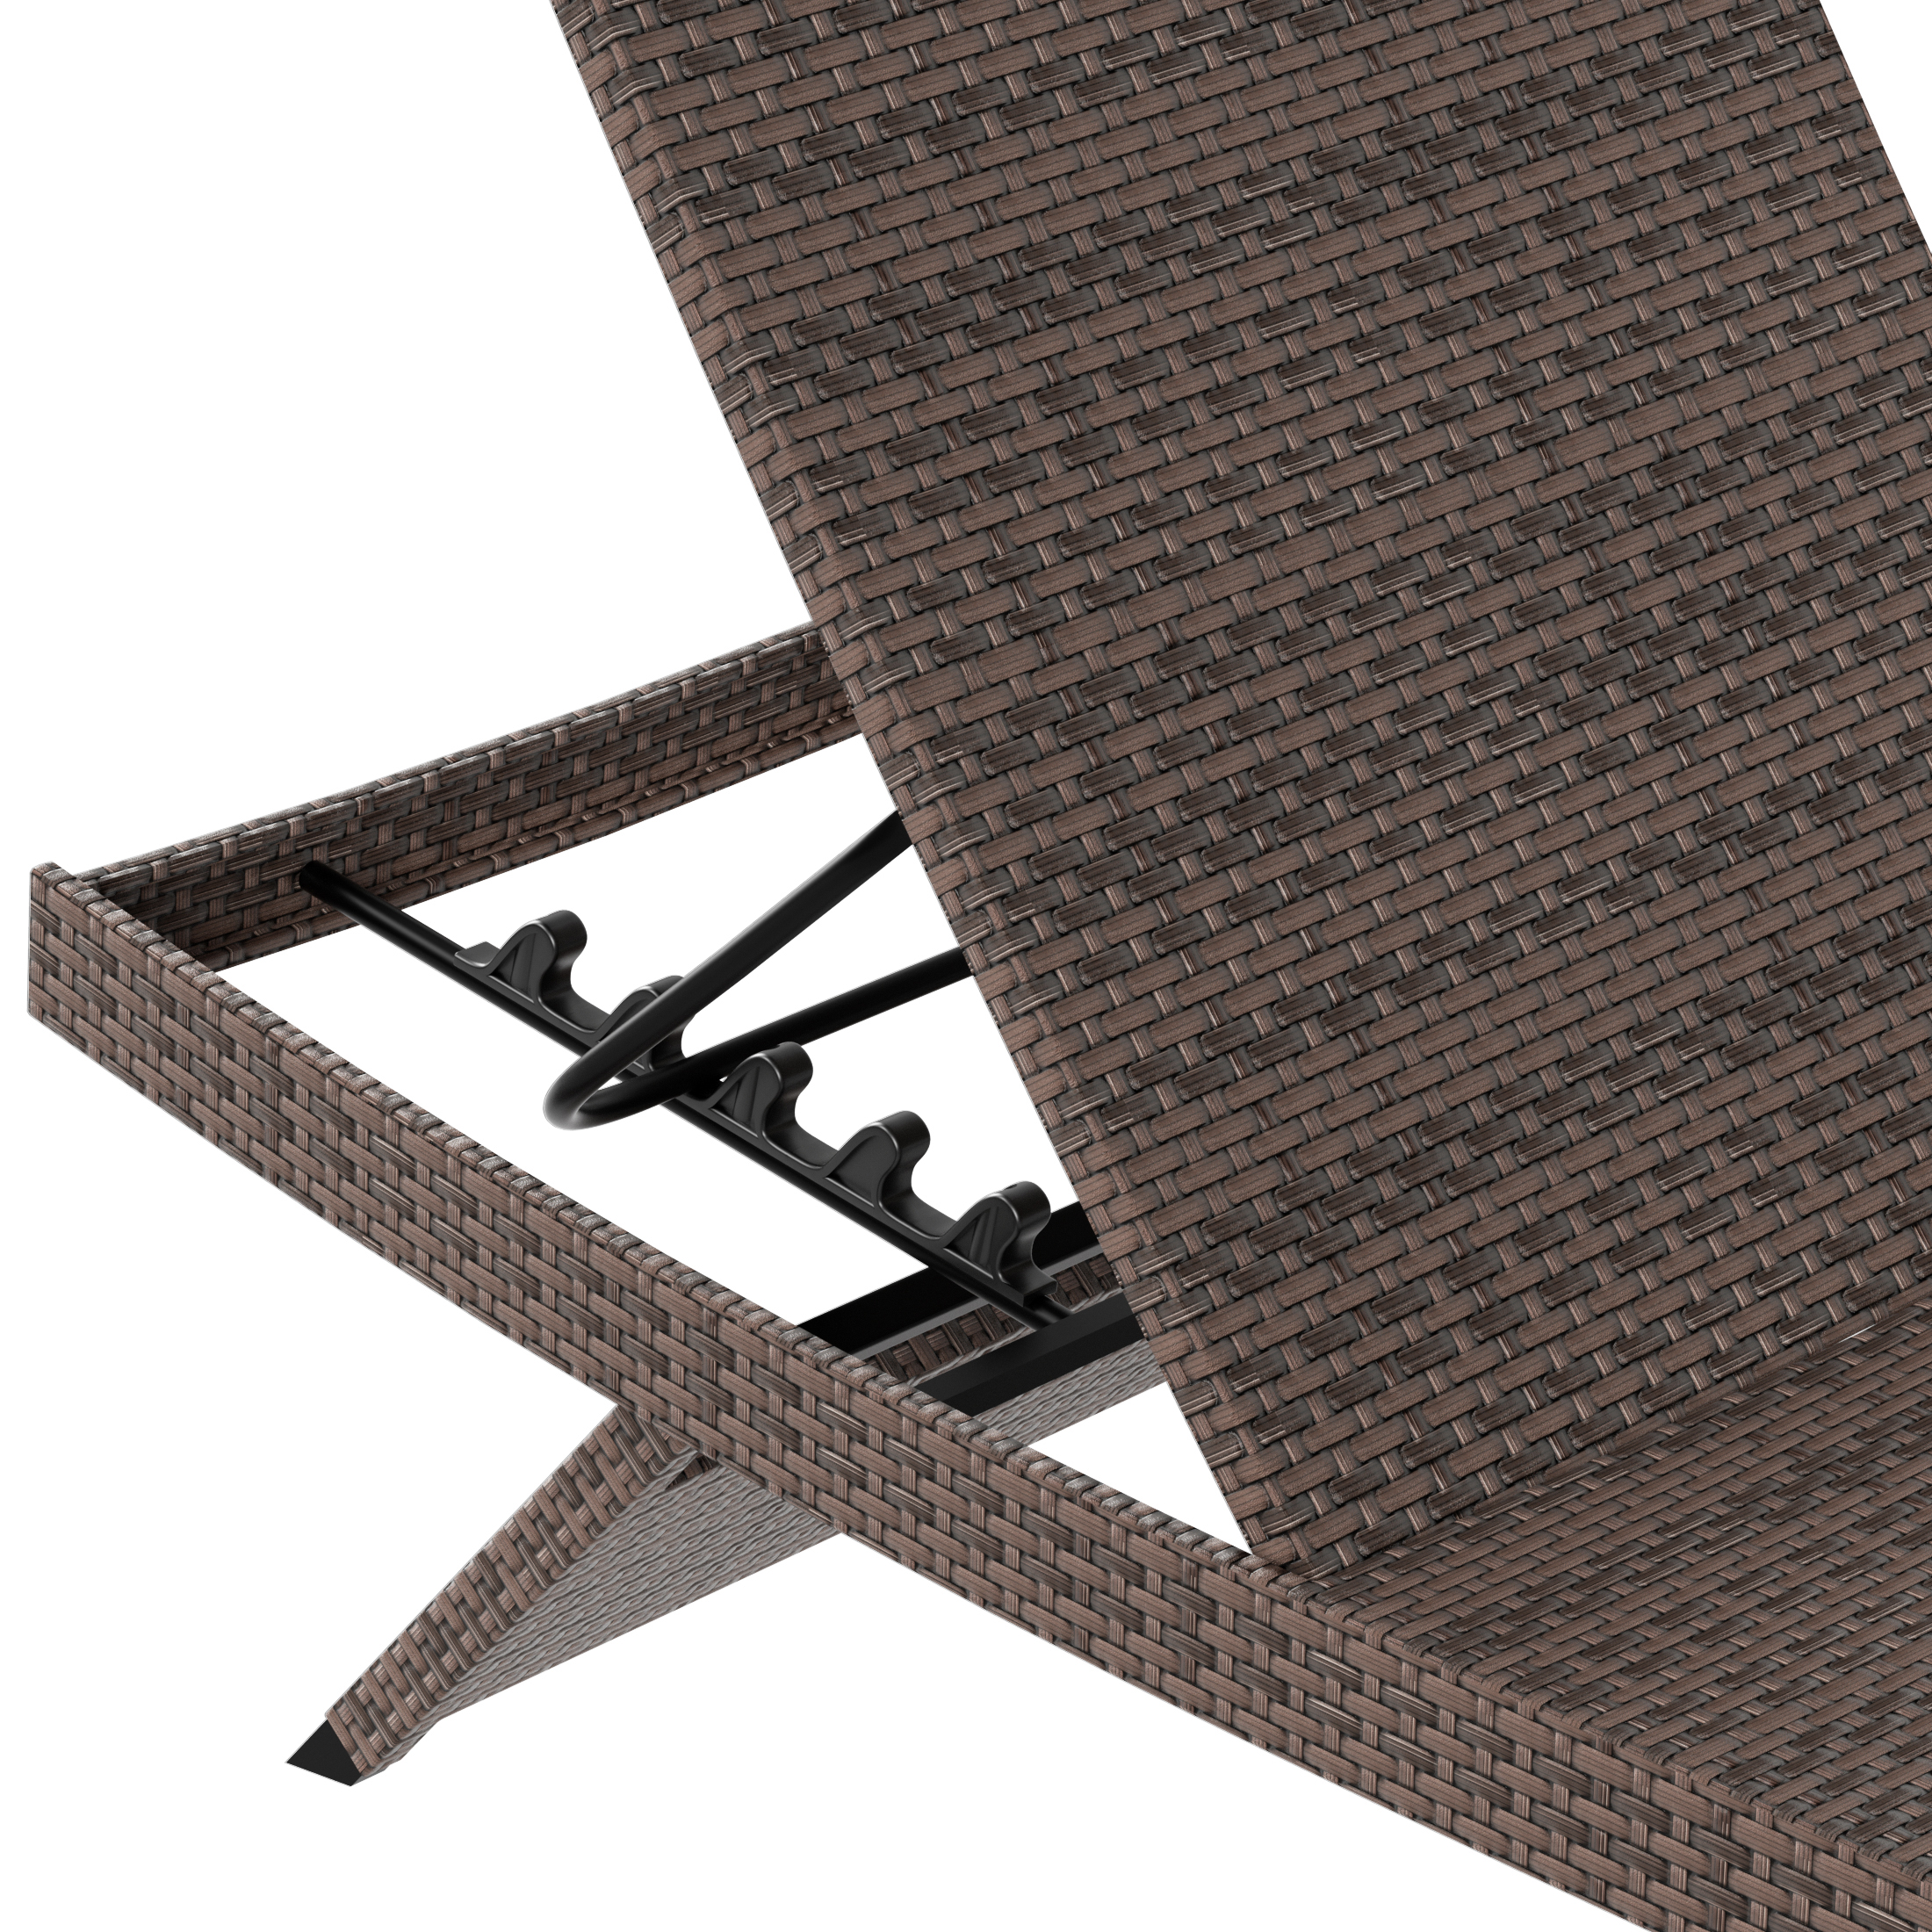 WestinTrends Somerset Wicker Double Chaise Lounge, All Weather PE Rattan Folding Outdoor Lounge Chairs Set of 2 Pool Chairs with Adjustable Backrest, Brown - image 2 of 8